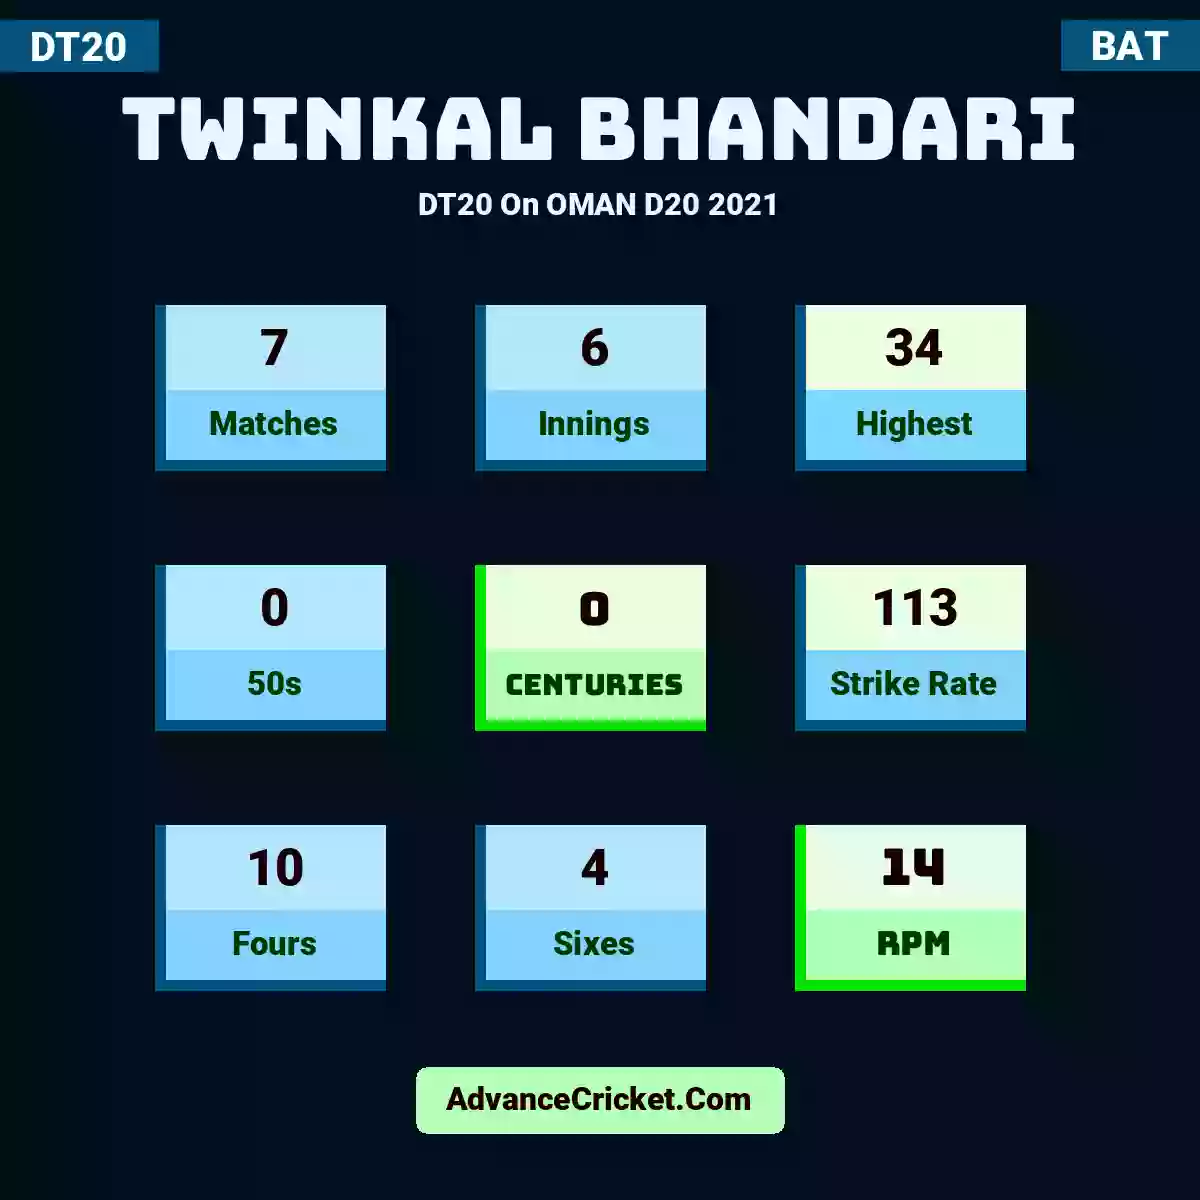 Twinkal Bhandari DT20  On OMAN D20 2021, Twinkal Bhandari played 7 matches, scored 34 runs as highest, 0 half-centuries, and 0 centuries, with a strike rate of 113. T.Bhandari hit 10 fours and 4 sixes, with an RPM of 14.